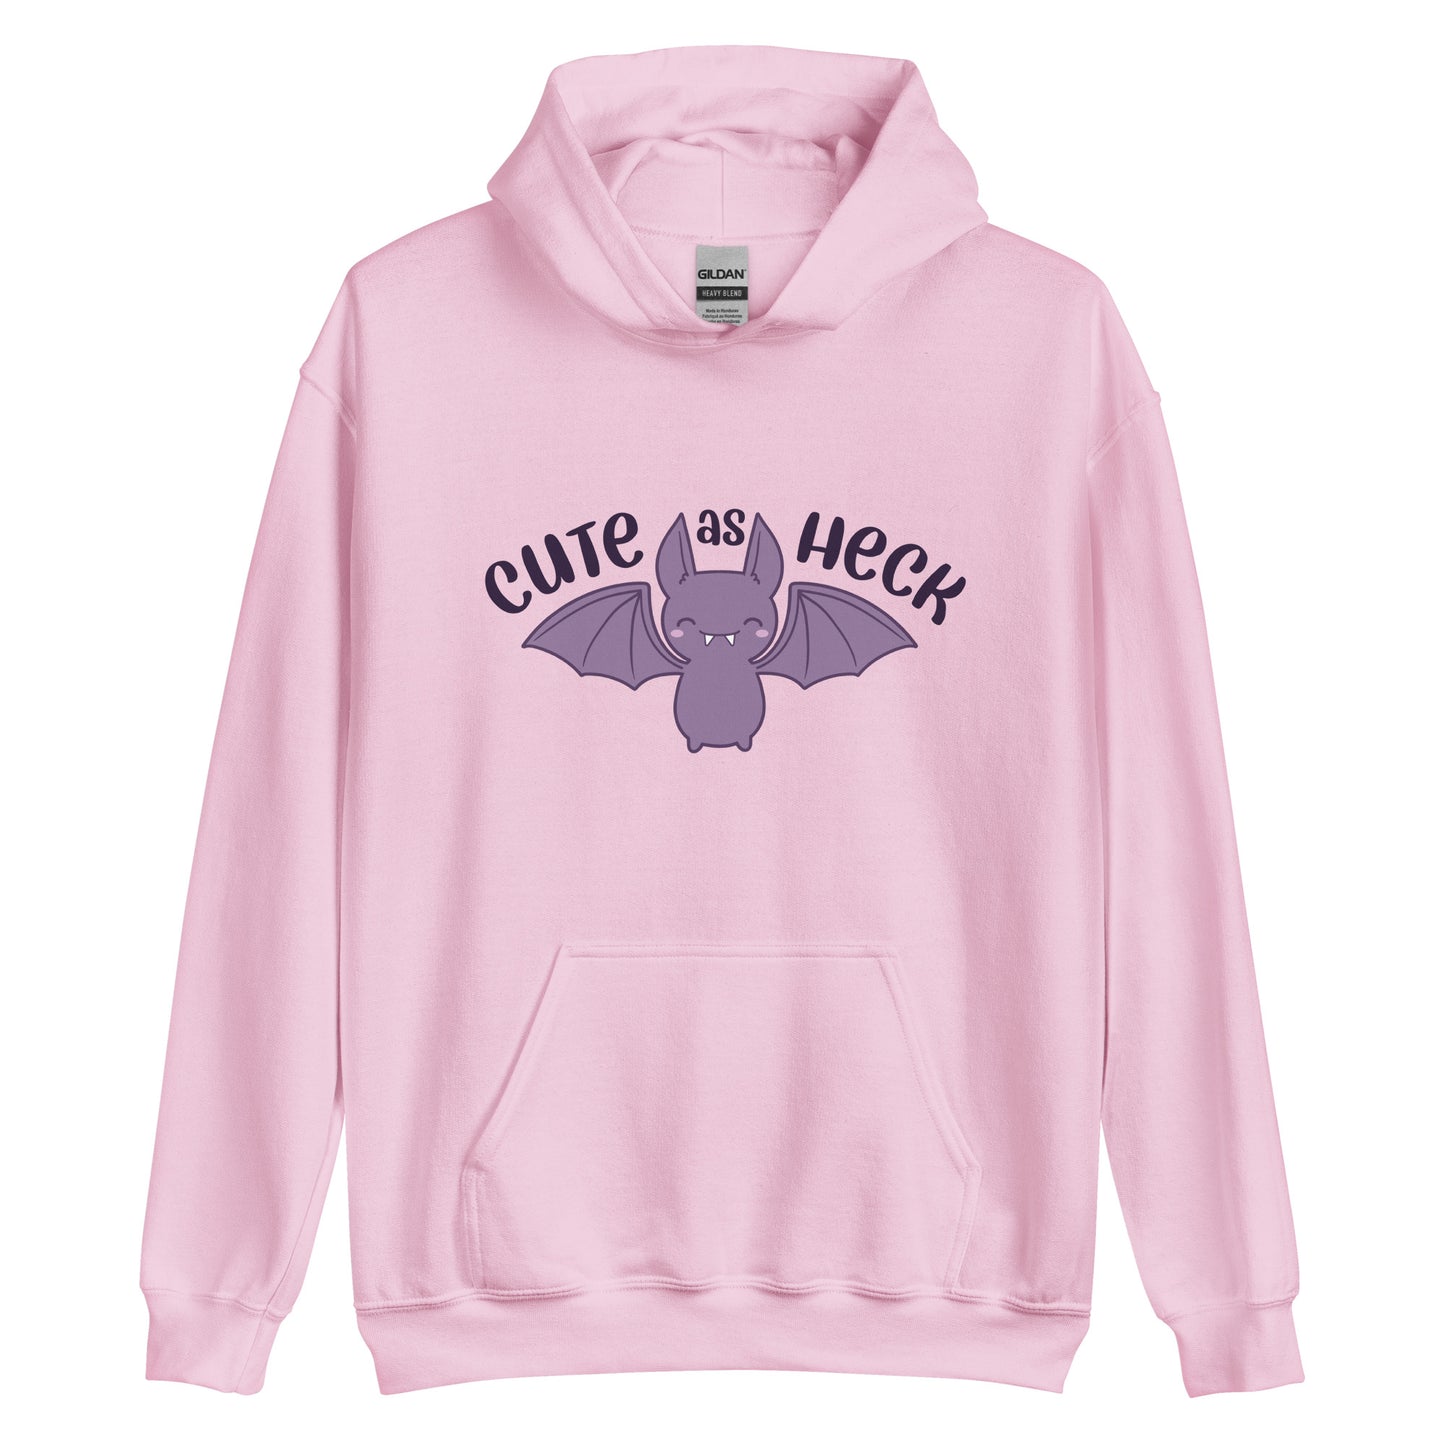 A light pink hooded sweatshirt featuring an illustration of a cute, smiling purple bat. Text above the bat reads "Cute As Heck"